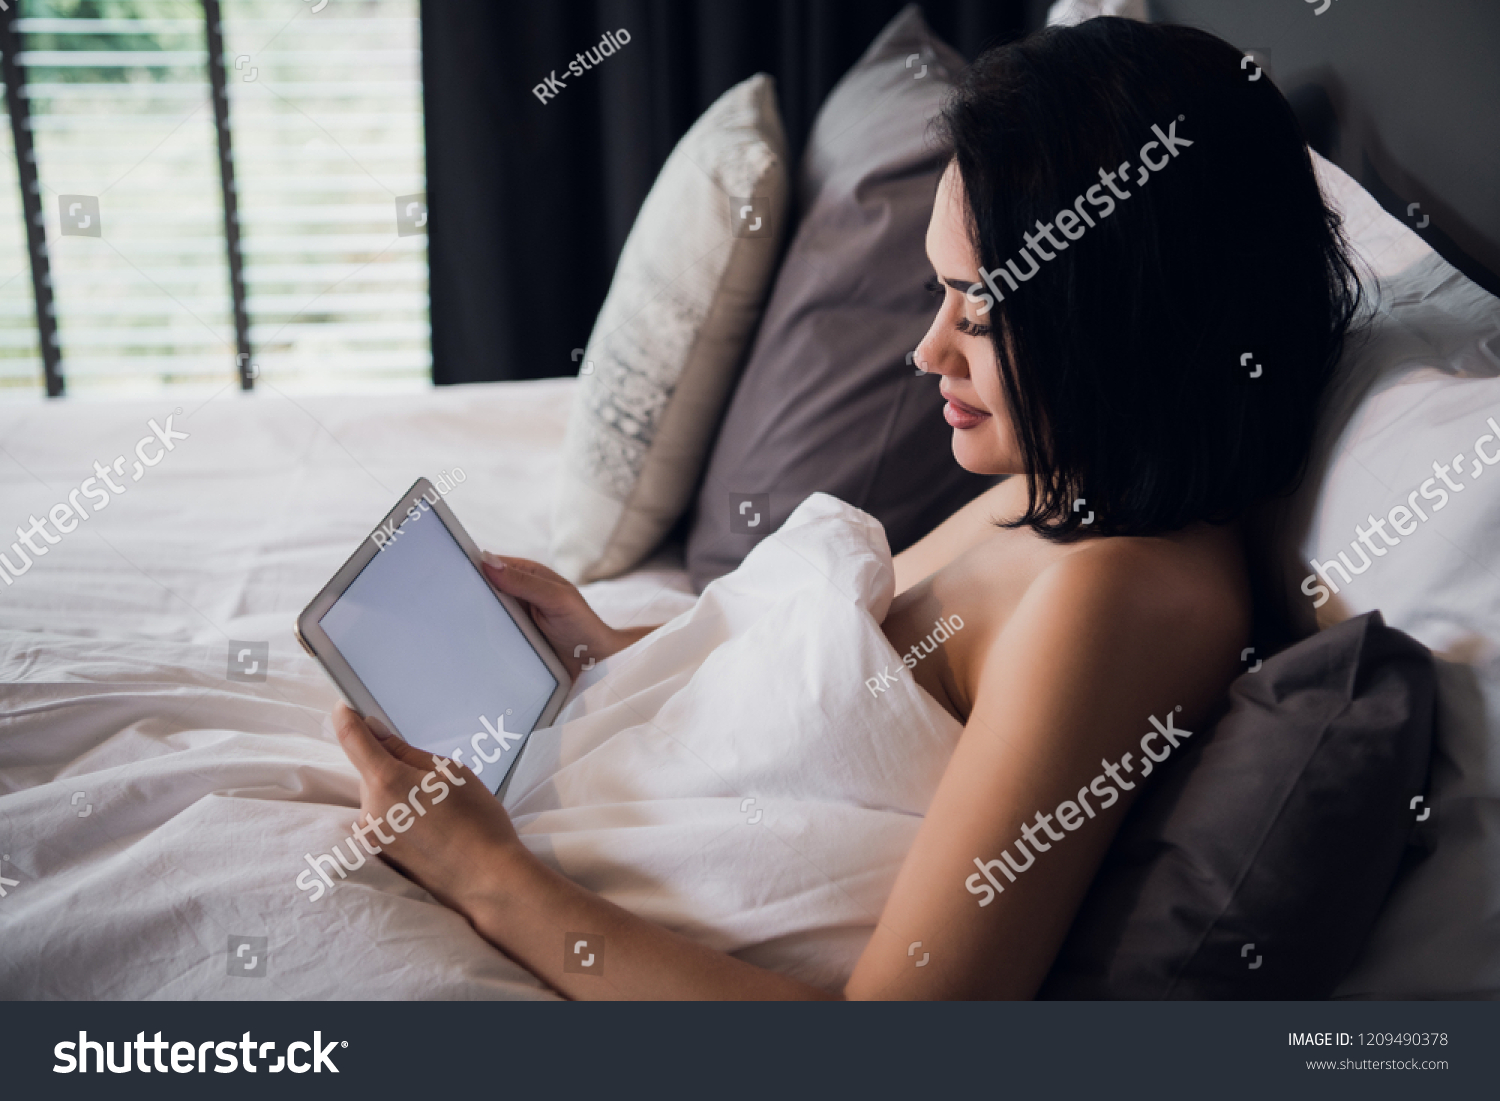 Young woman enjoying en e-book as she relaxes in the bed with tablet pc #1209490378